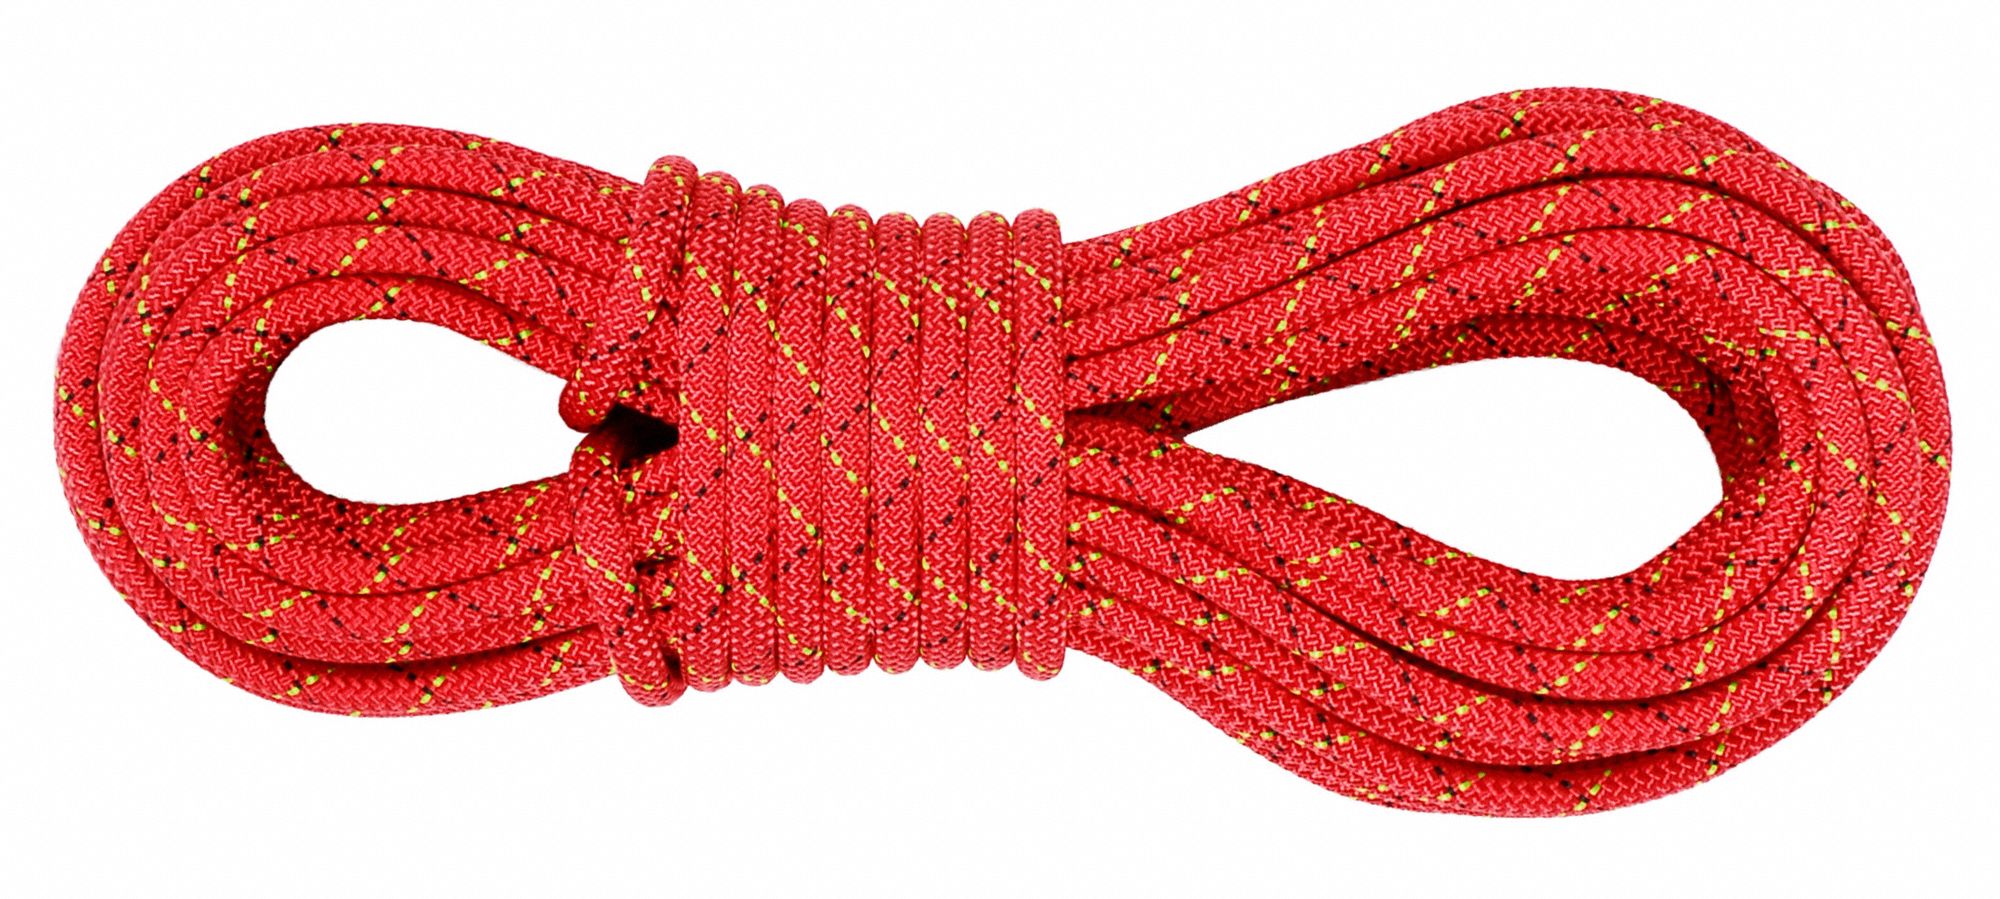 STERLING Rescue Rope: Kernmantle, 7/16 in Dia, 955 lb Working Load Limit,  600 ft Overall Lg, Aramid